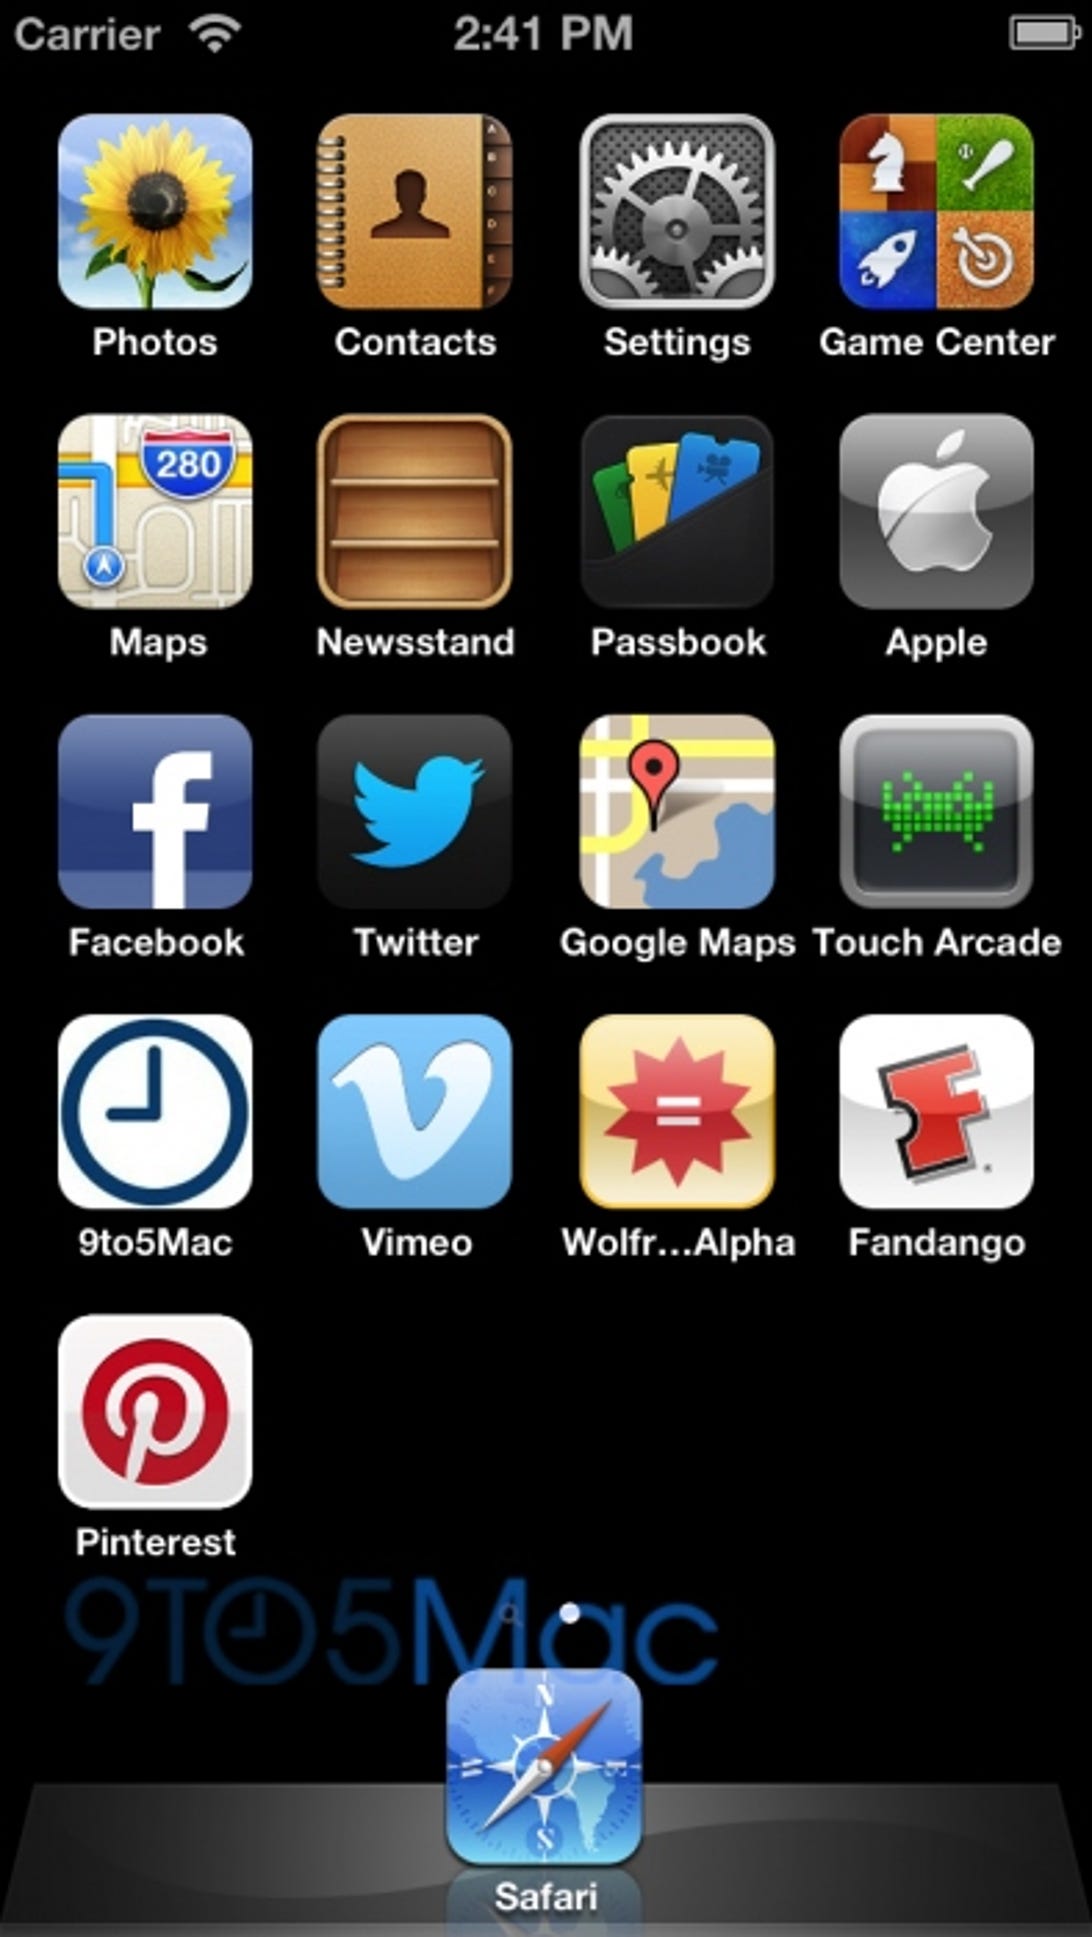 How iOS 6 could handle the extra screen space.